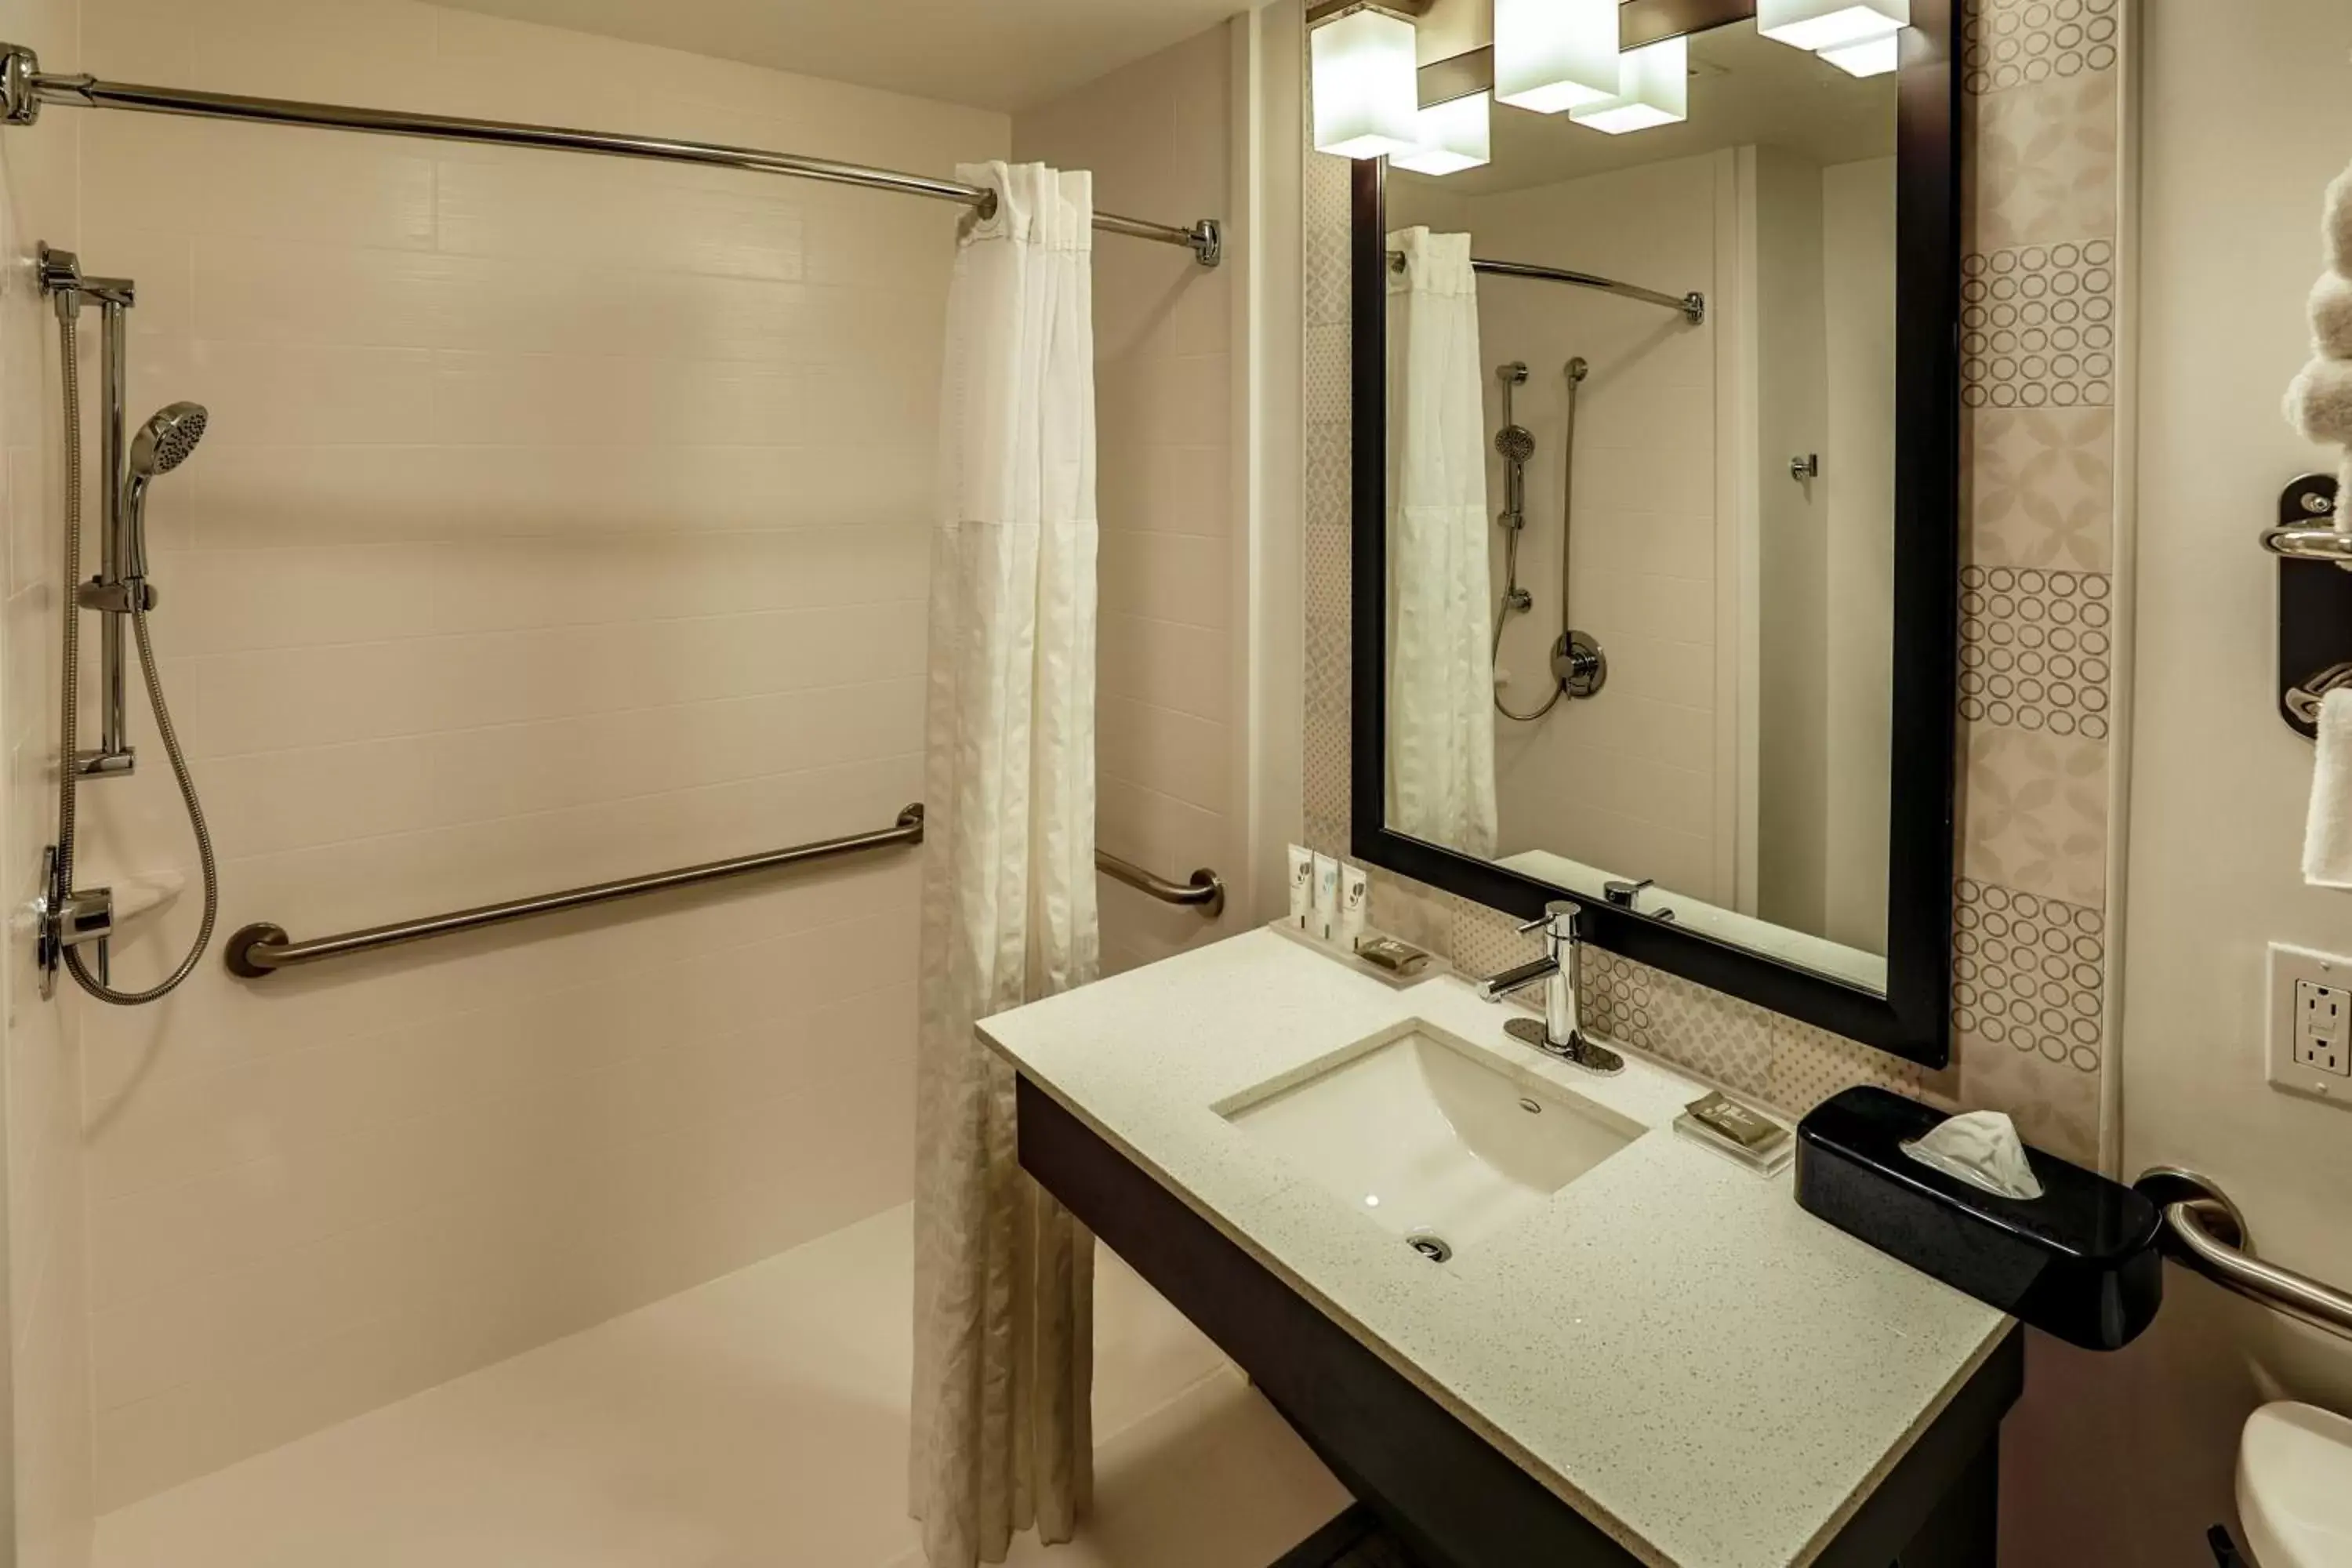 Bathroom in Country Inn & Suites by Radisson, Nashville Airport, TN